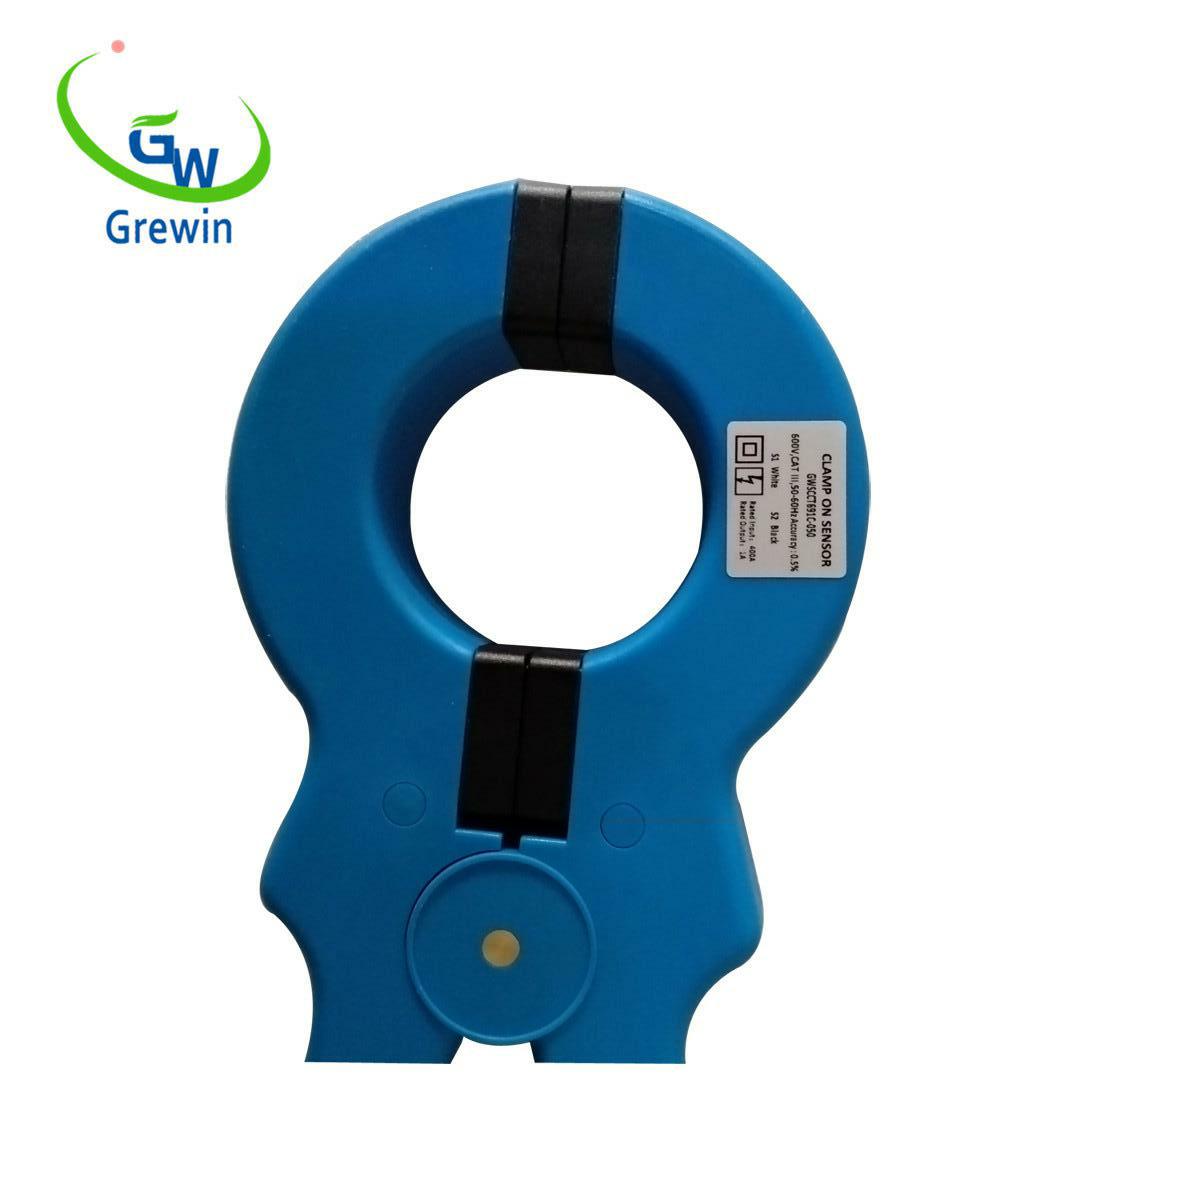 IEC60076 100A-1000A clamp-on current transformer for electrical wiring and equipment